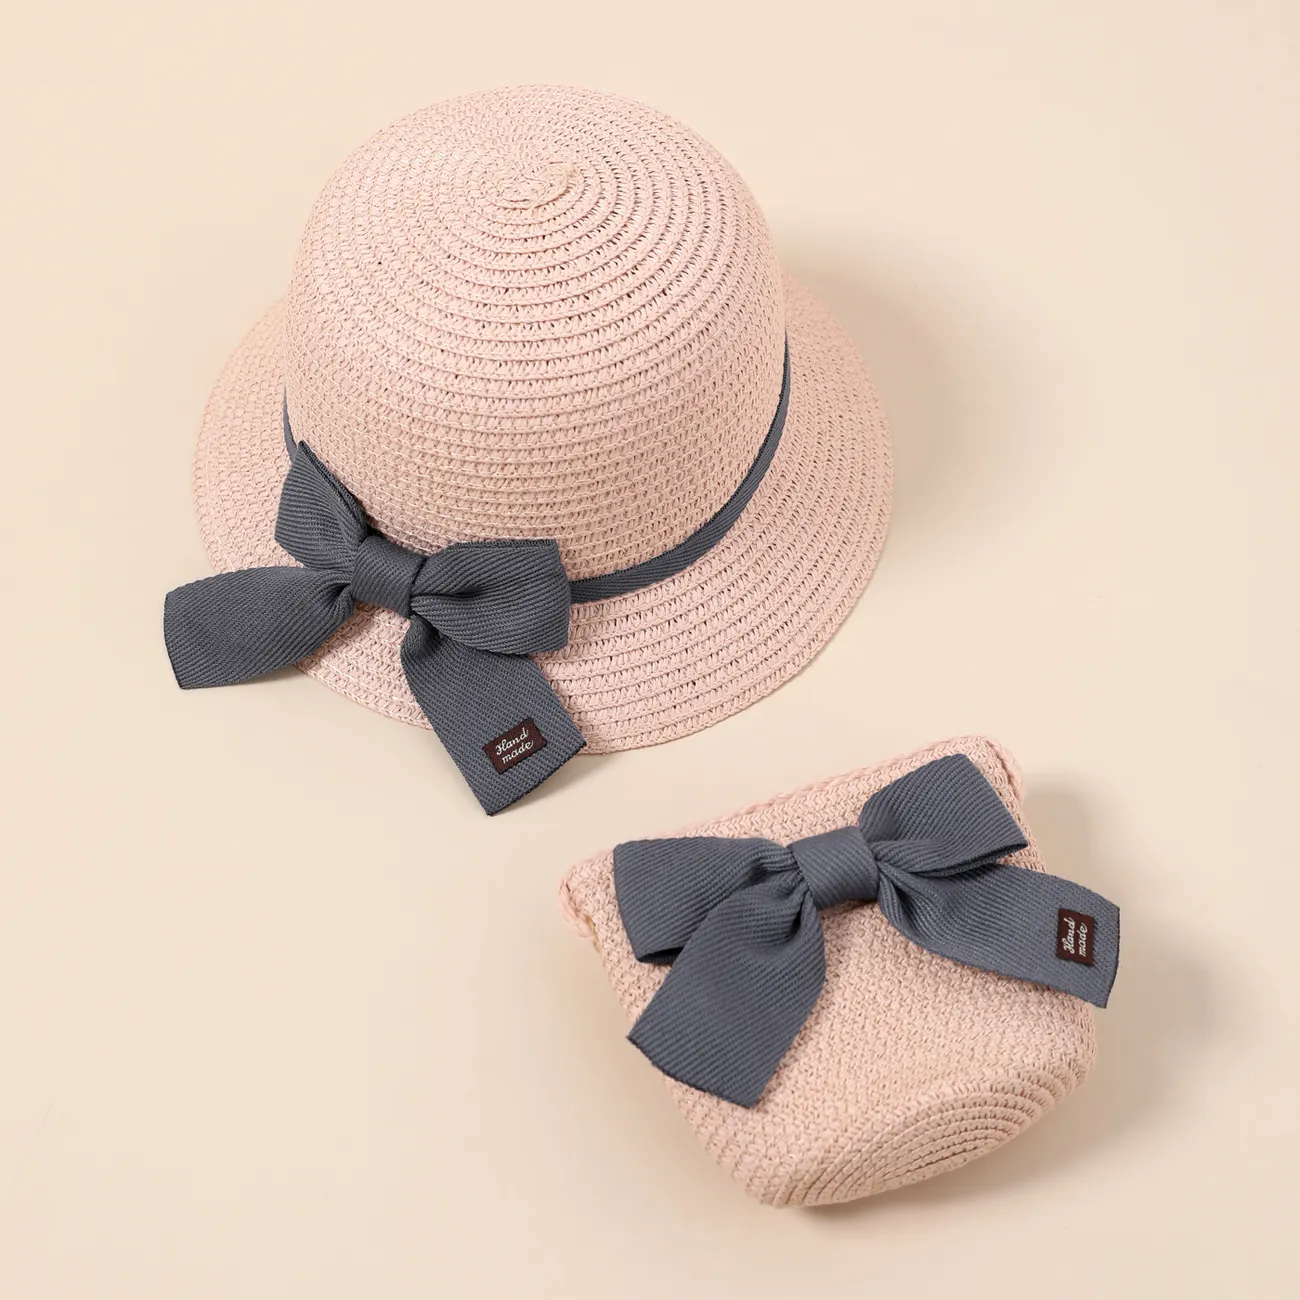 Toddler / Kid Lace-up Bow Straw Bucket Hat and Straw Bag Set for Girls Light Pink big image 1